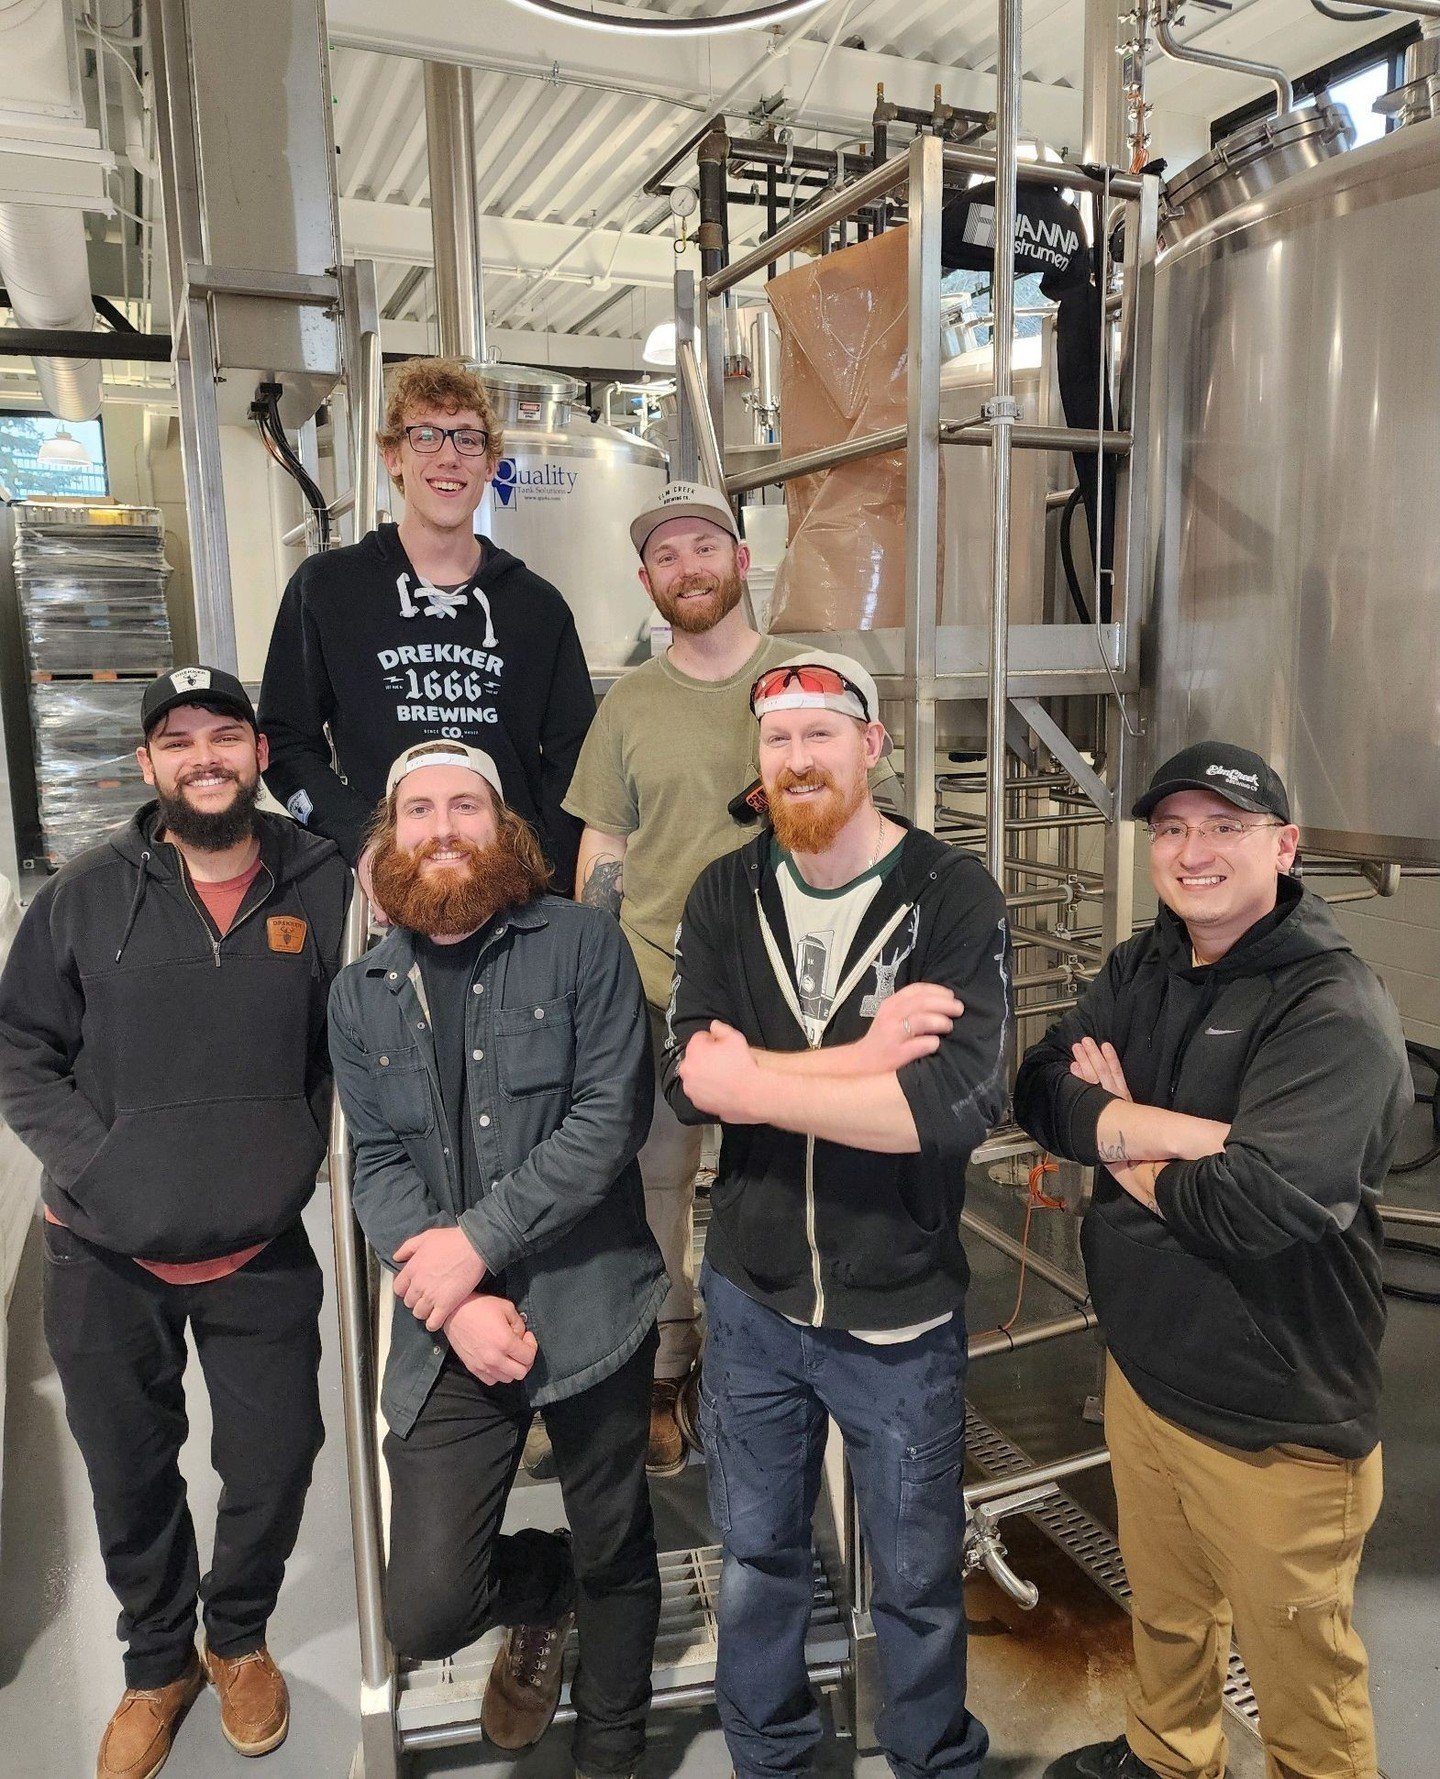 Just gonna build some anticipation with this collab pic.....⁠
⁠
But you'll have to be patient, one more month until you can sip this epic brew 😜⁠
⁠
⁠
⁠
⁠
#elmcreekbrewing #mncraftbeer #ndcraftbeer #beerme